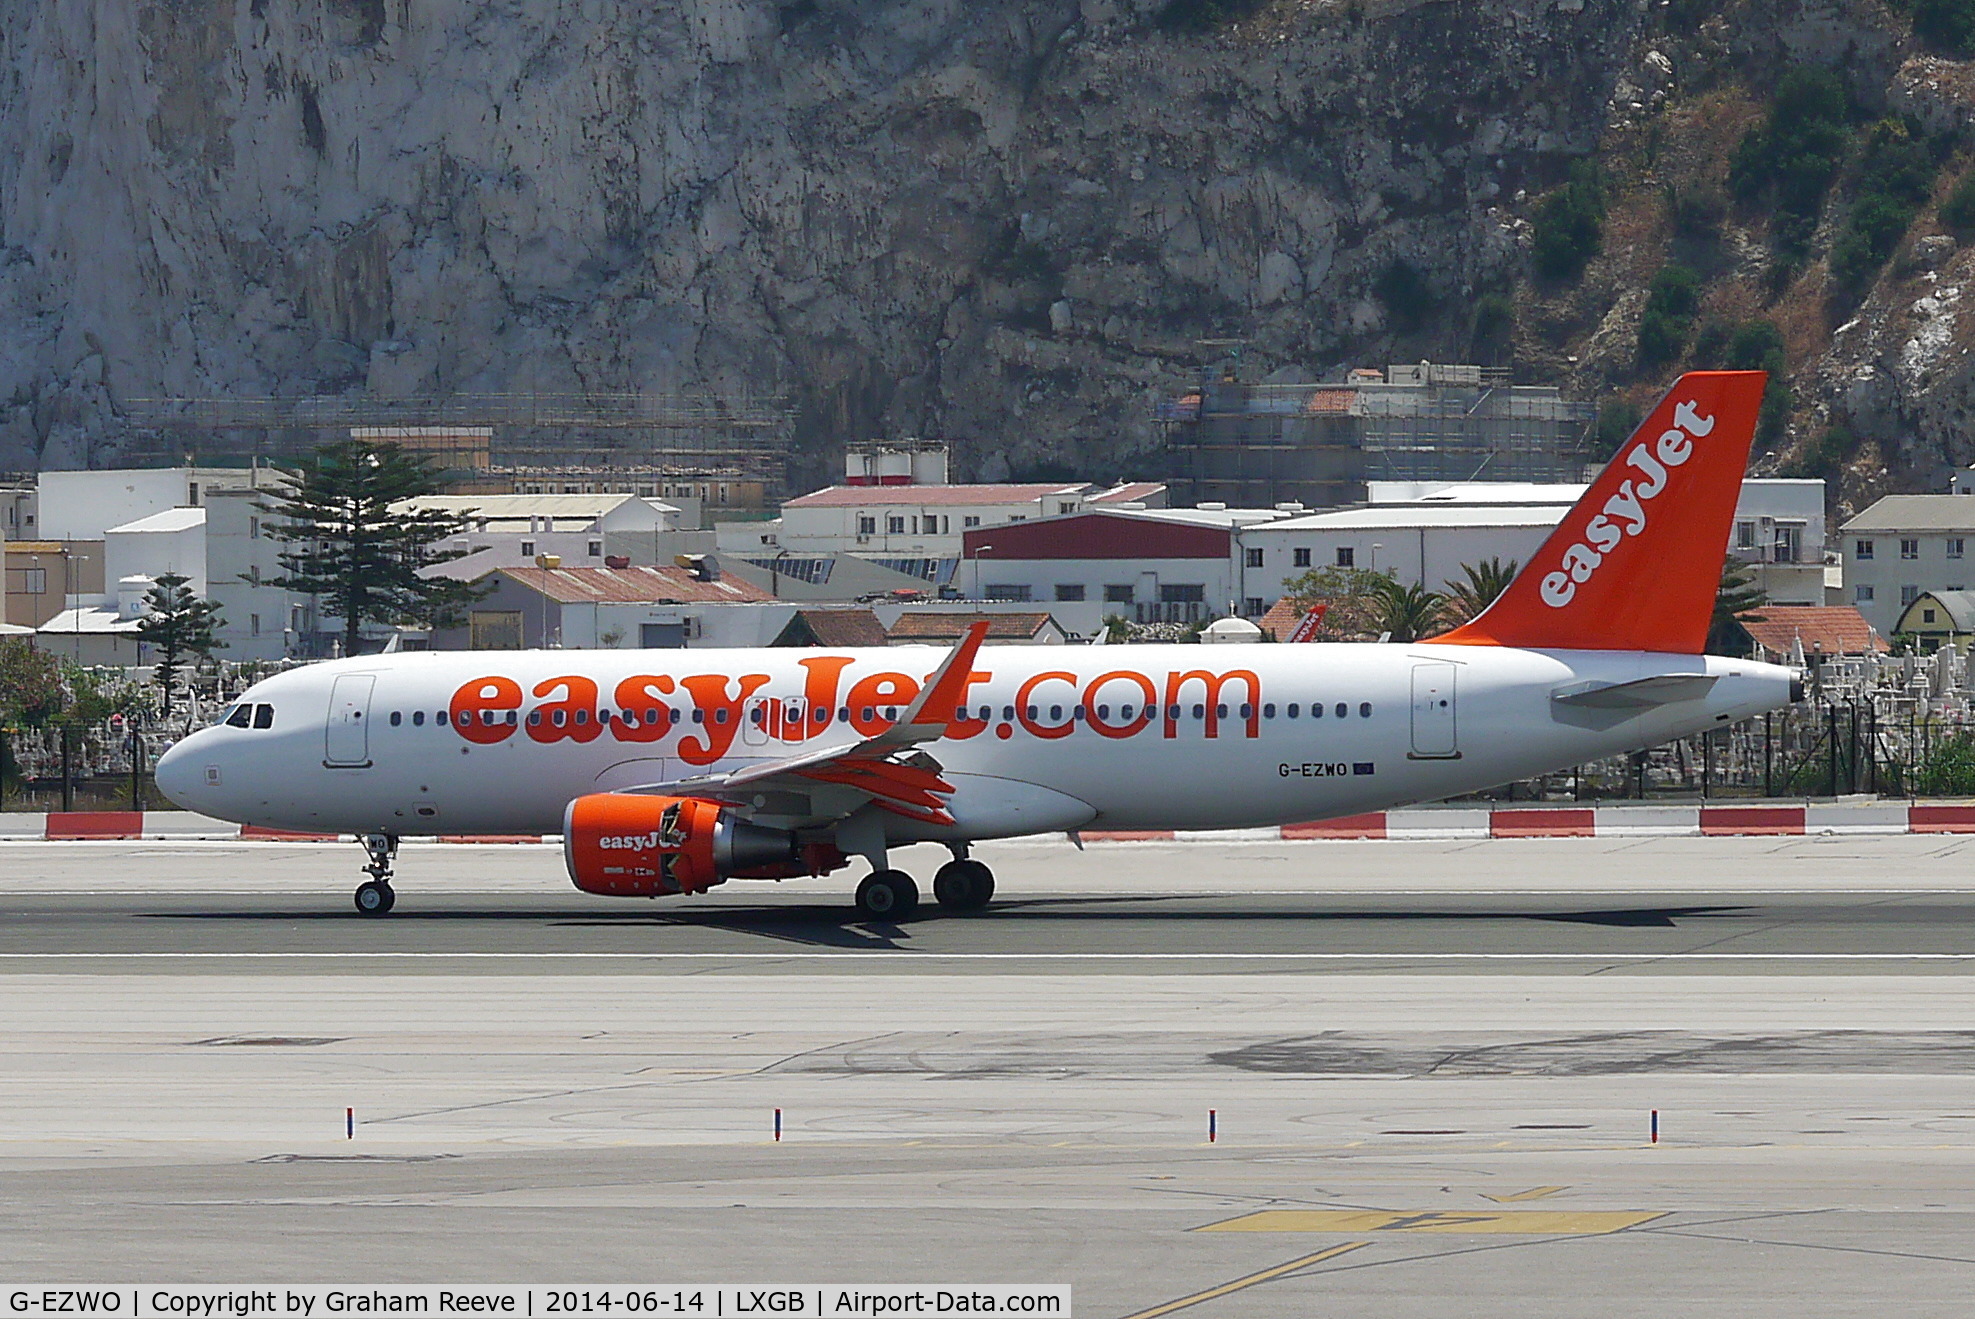 G-EZWO, 2013 Airbus A320-214 C/N 5785, Just landed at Gibraltar.